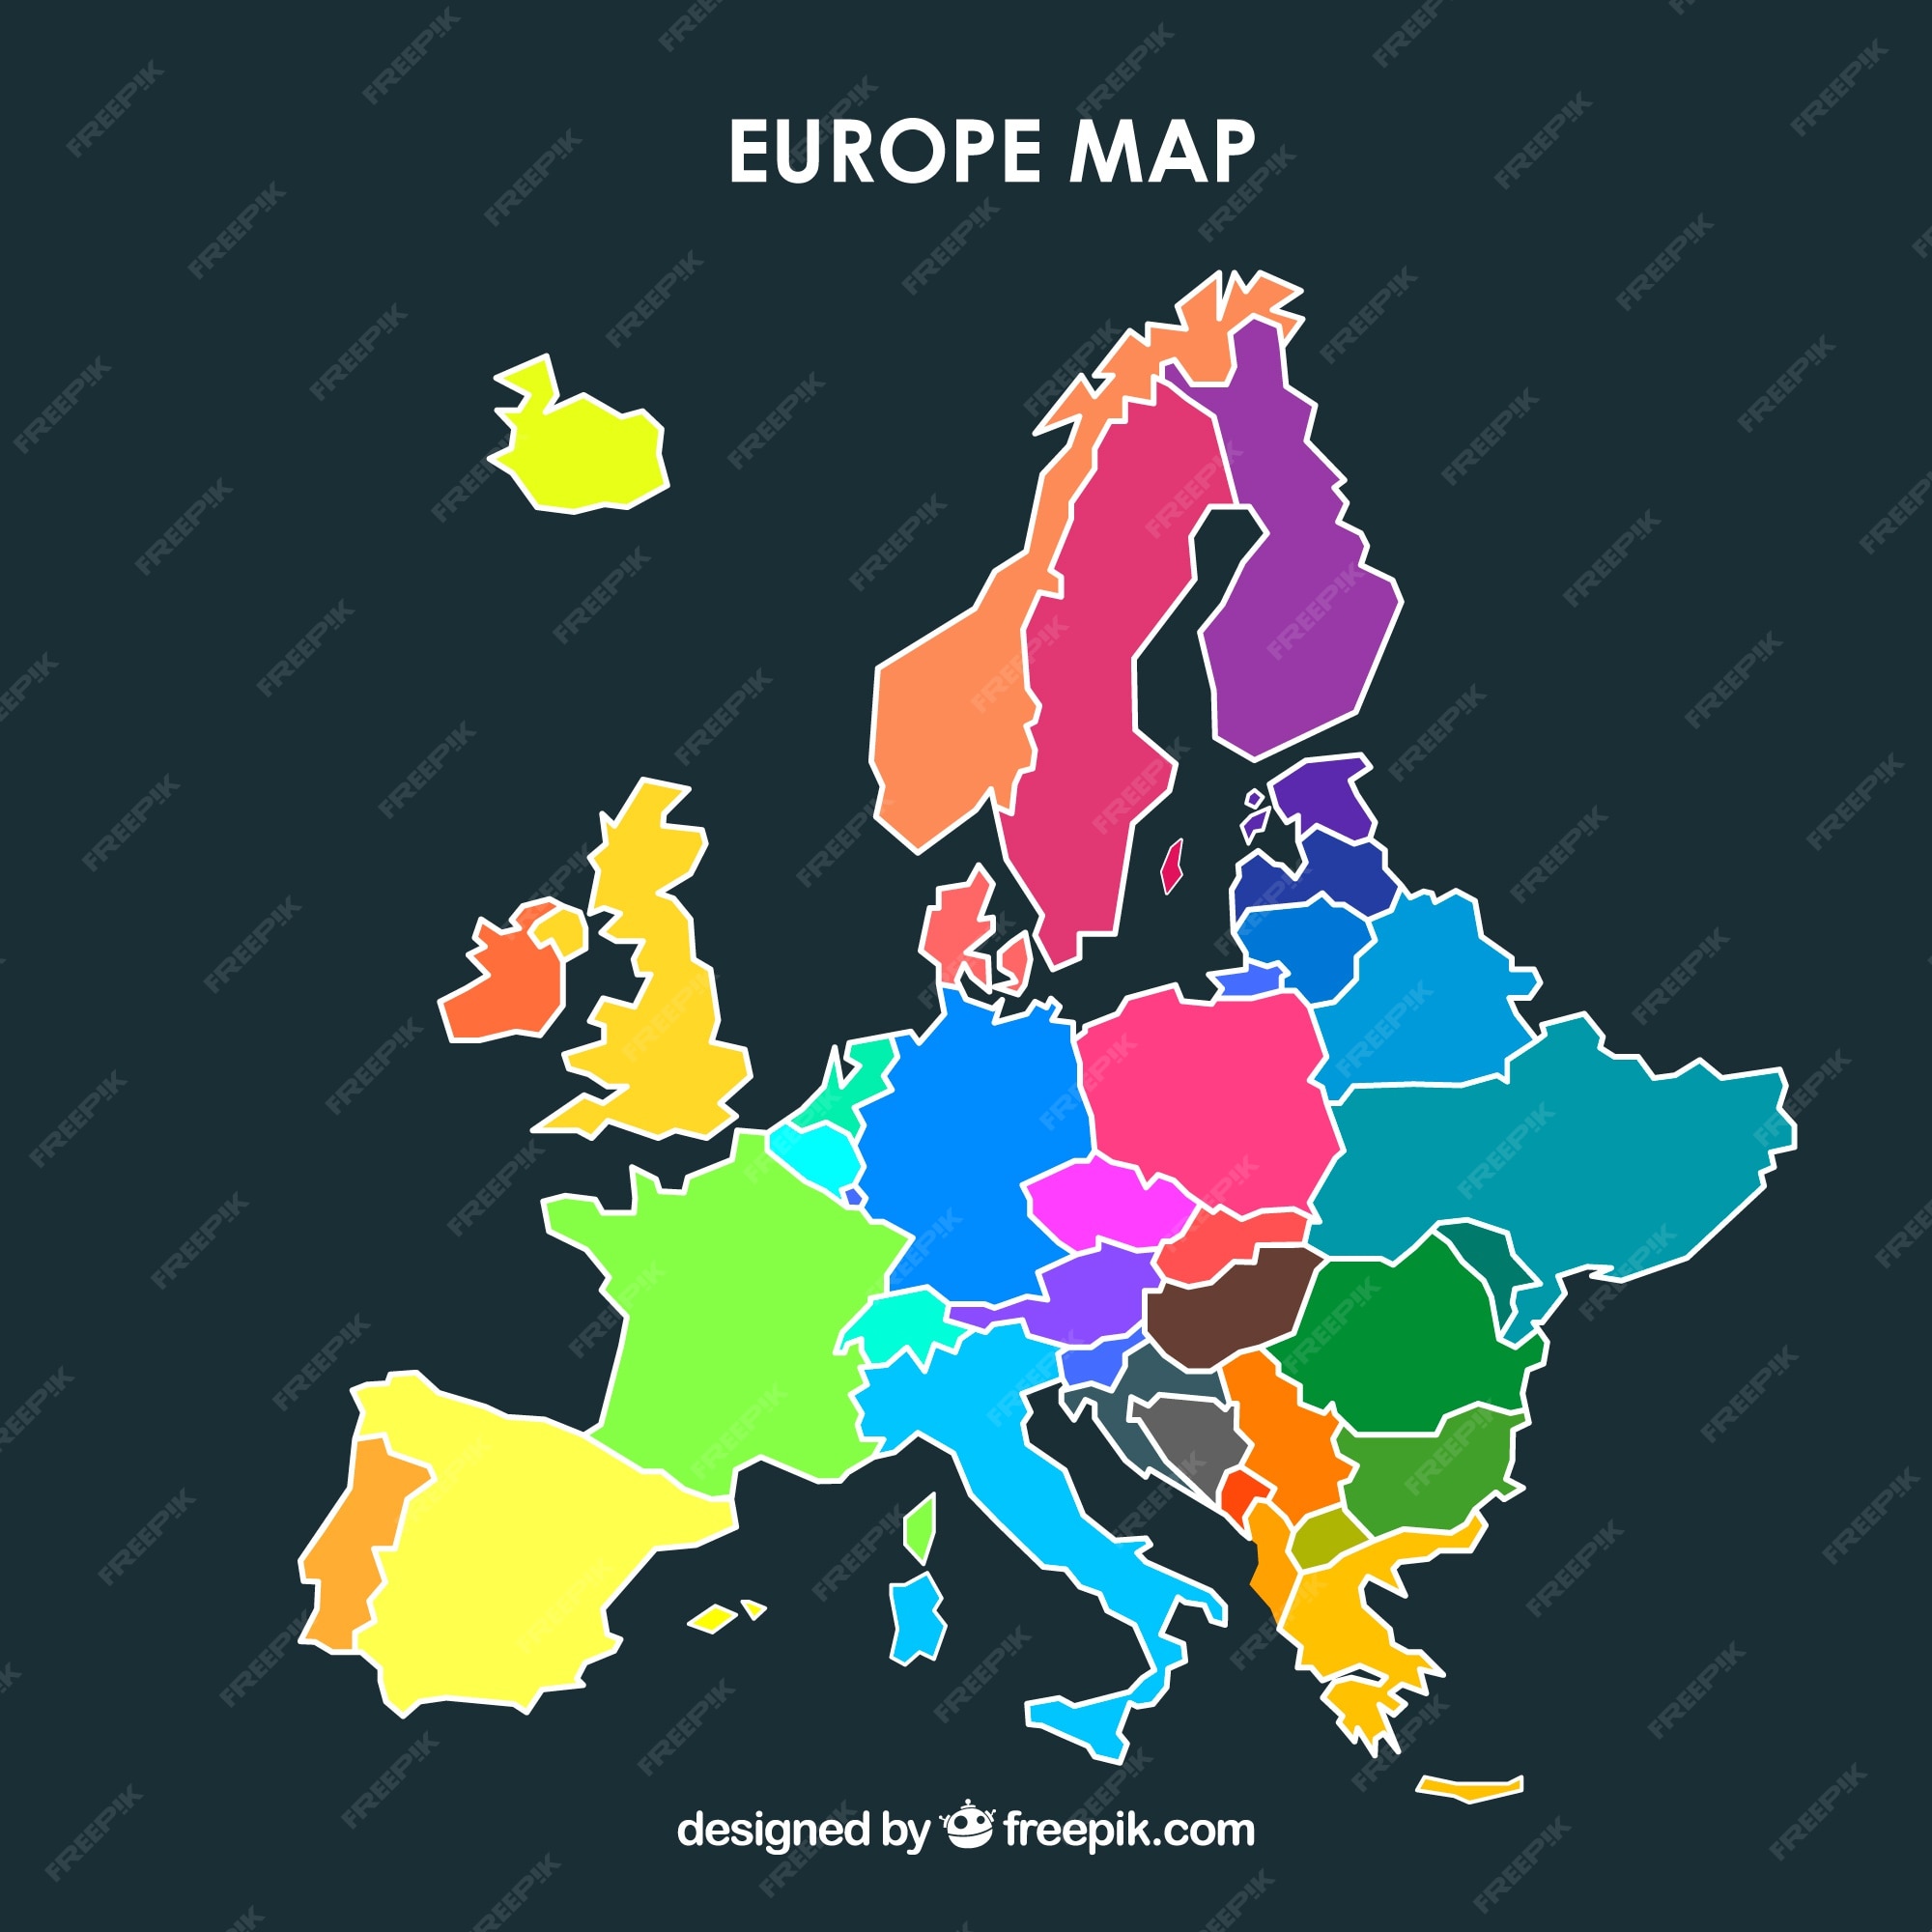 Map With Countries Images Free Download on Freepik